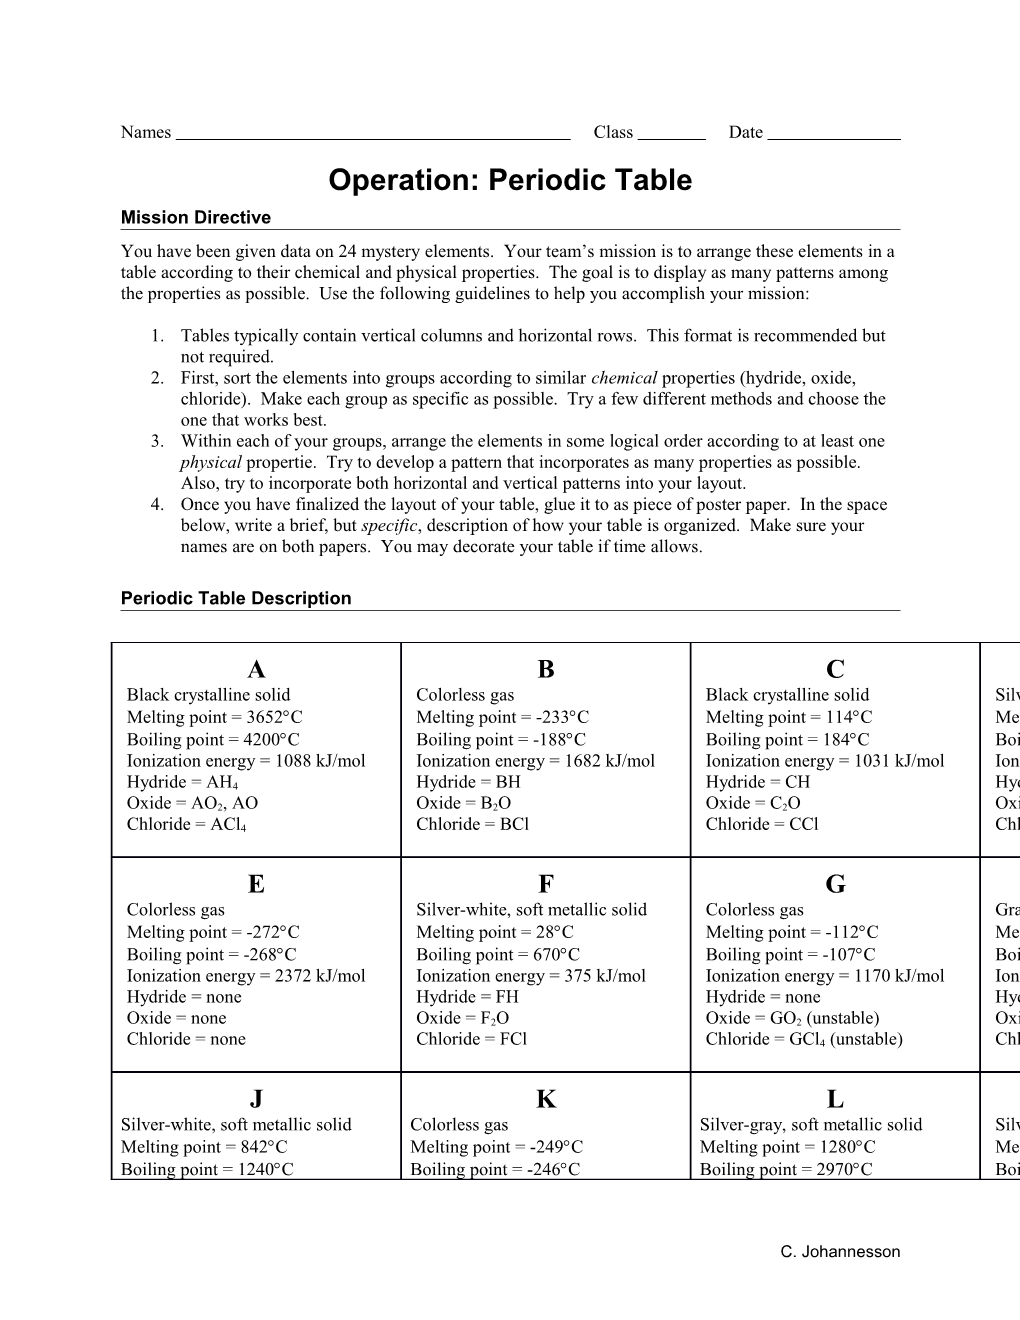 Operation: Periodic Table